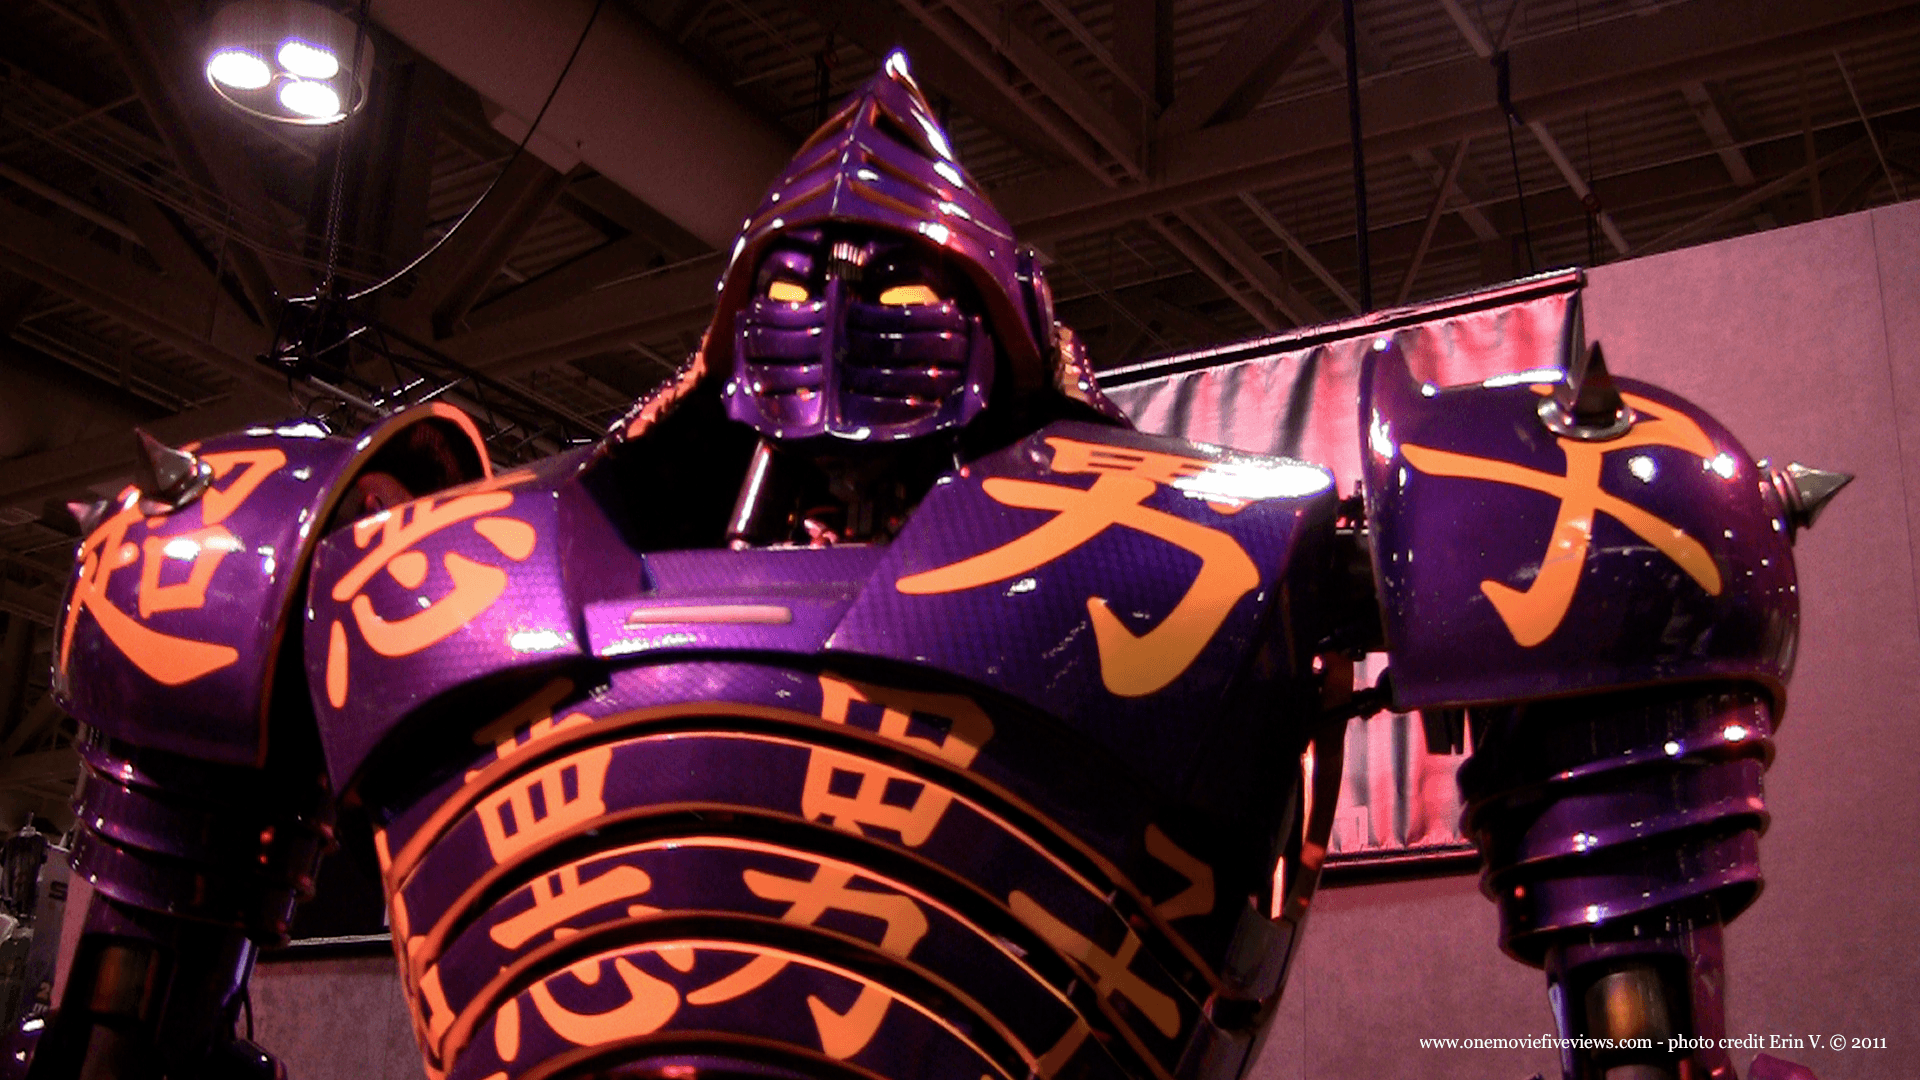 Noisy Boy bust at Fan Expo 2011. One Movie, Our Views